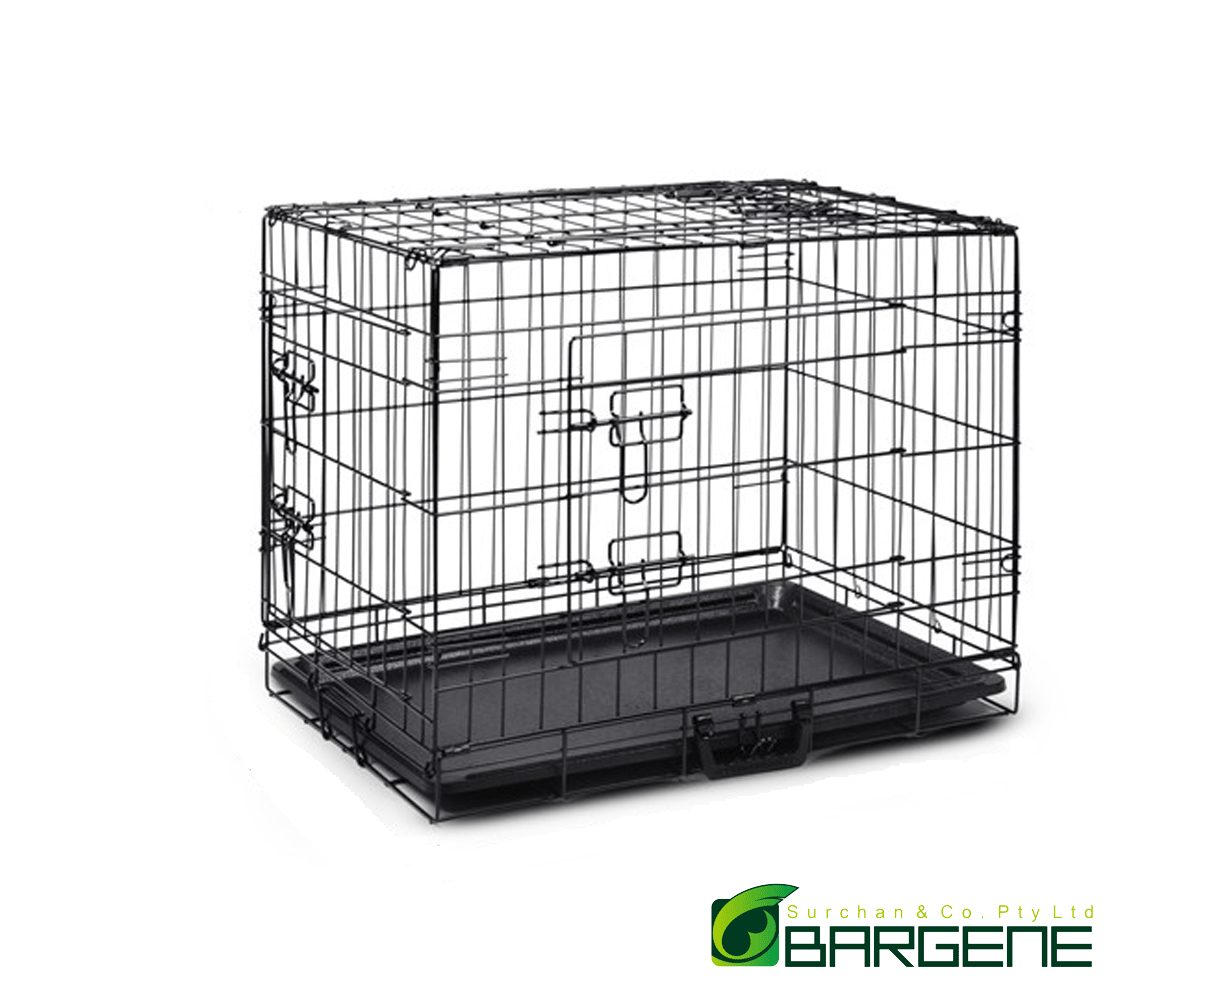 42" Portable Pet Dog Cage Collapsible Metal Crate Kennel